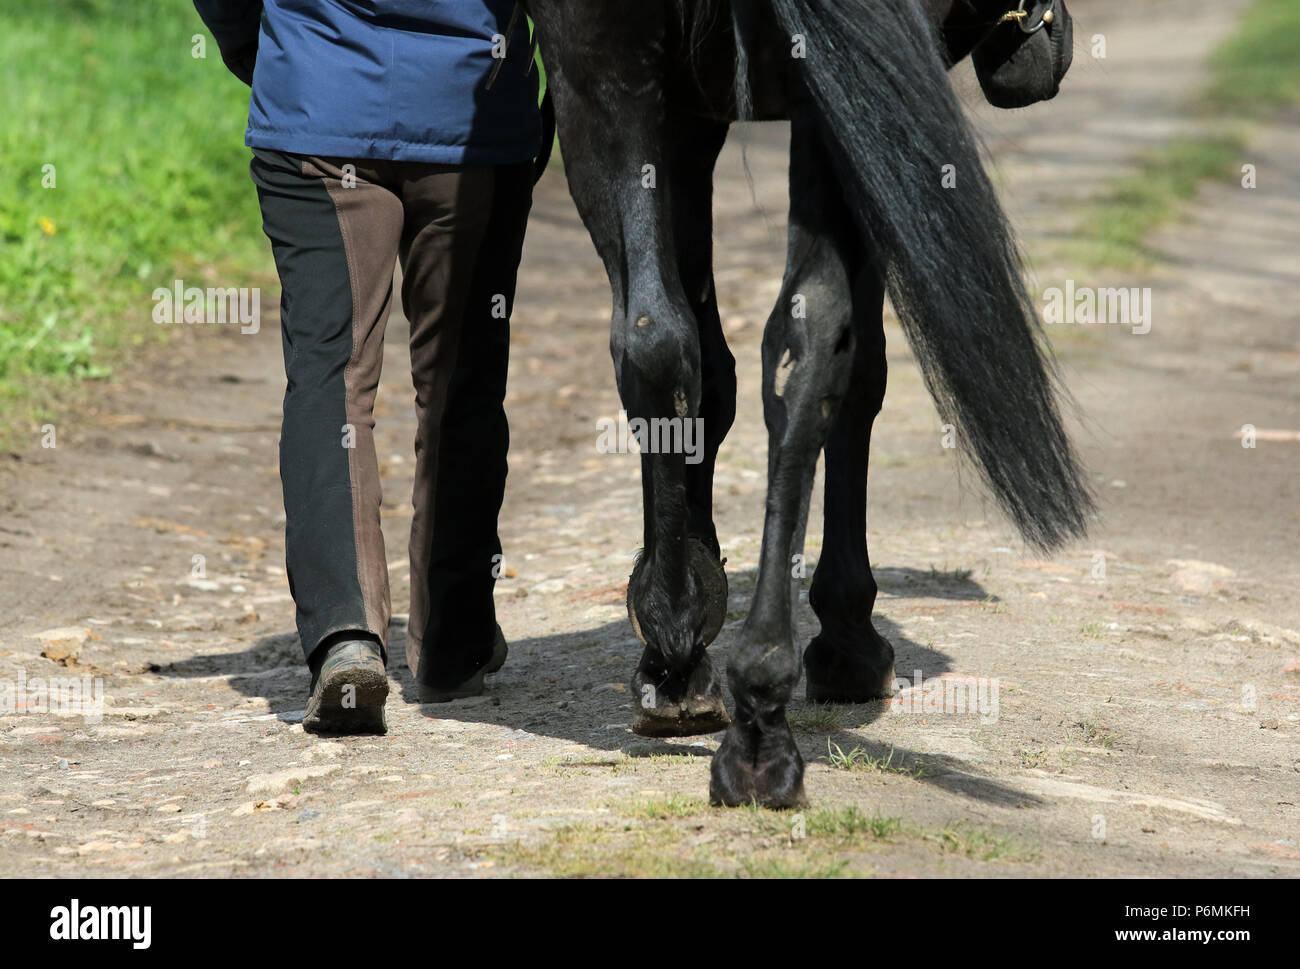 Melbeck, detail, horse is guided Stock Photo